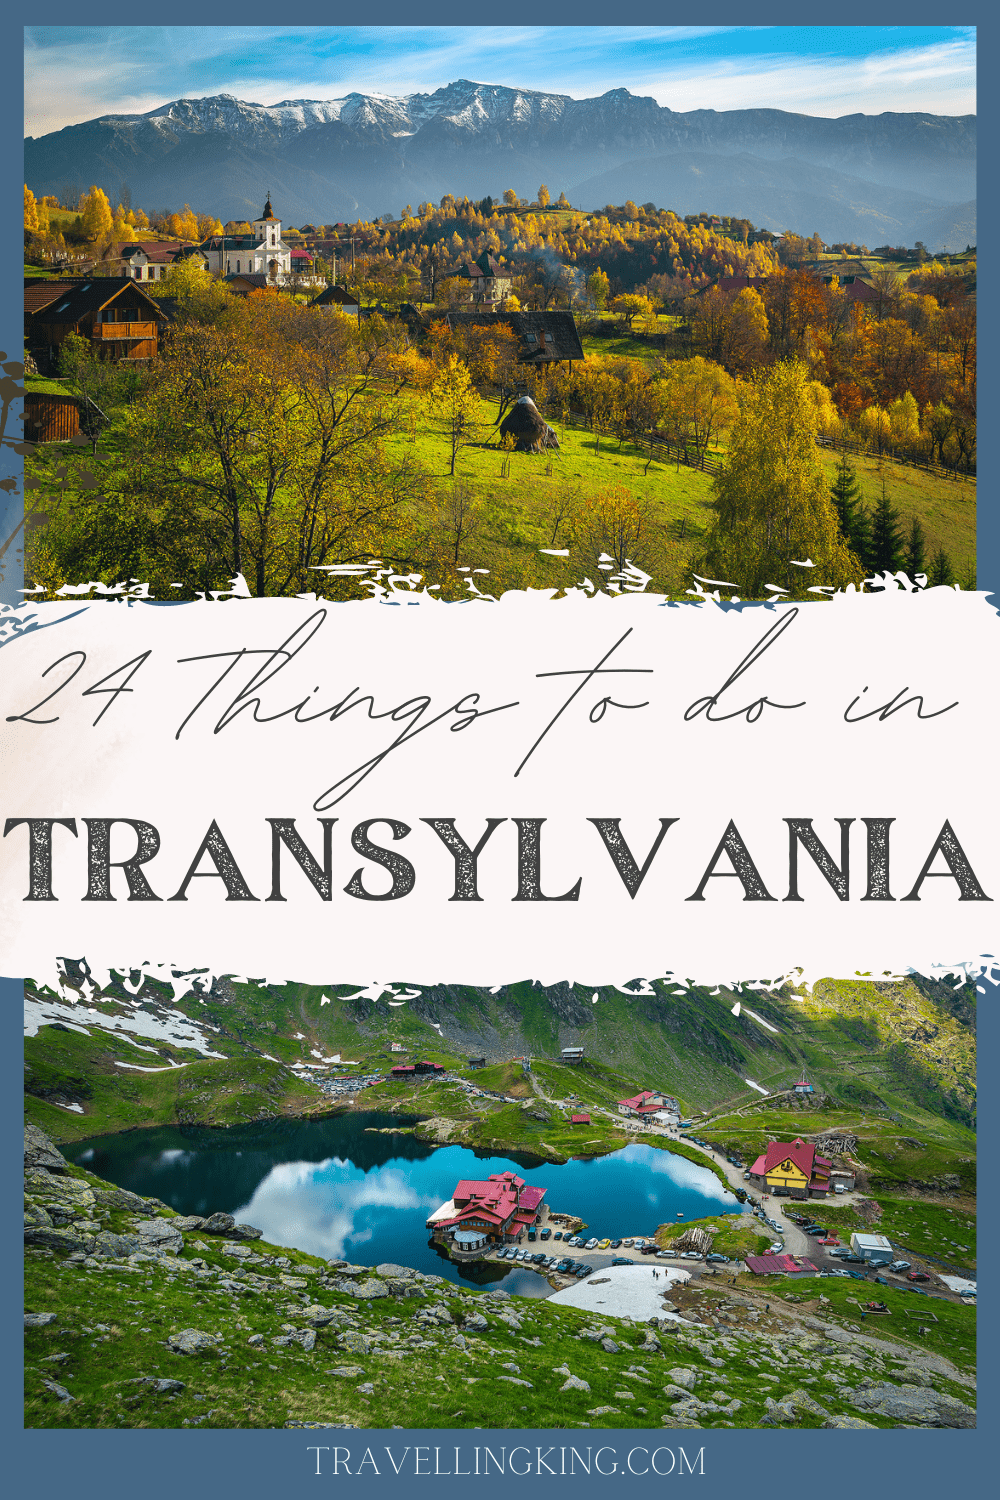 24 Things to do in Transylvania